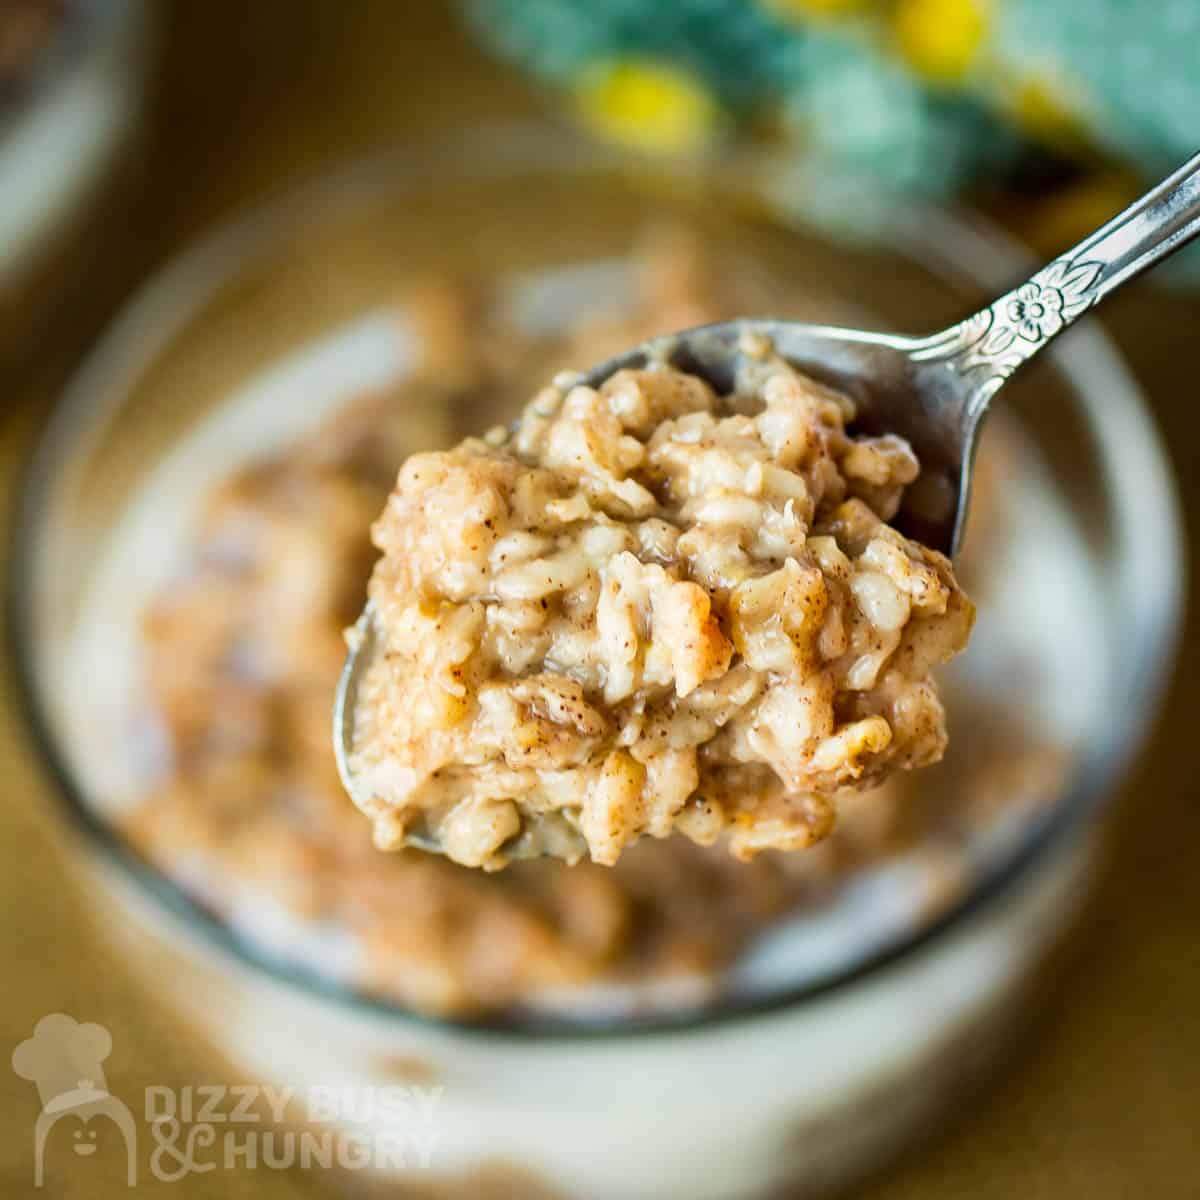 Close up shot of a spoon holding a bite of oatmeal over a clear bowl of oatmeal on a wooden surface.